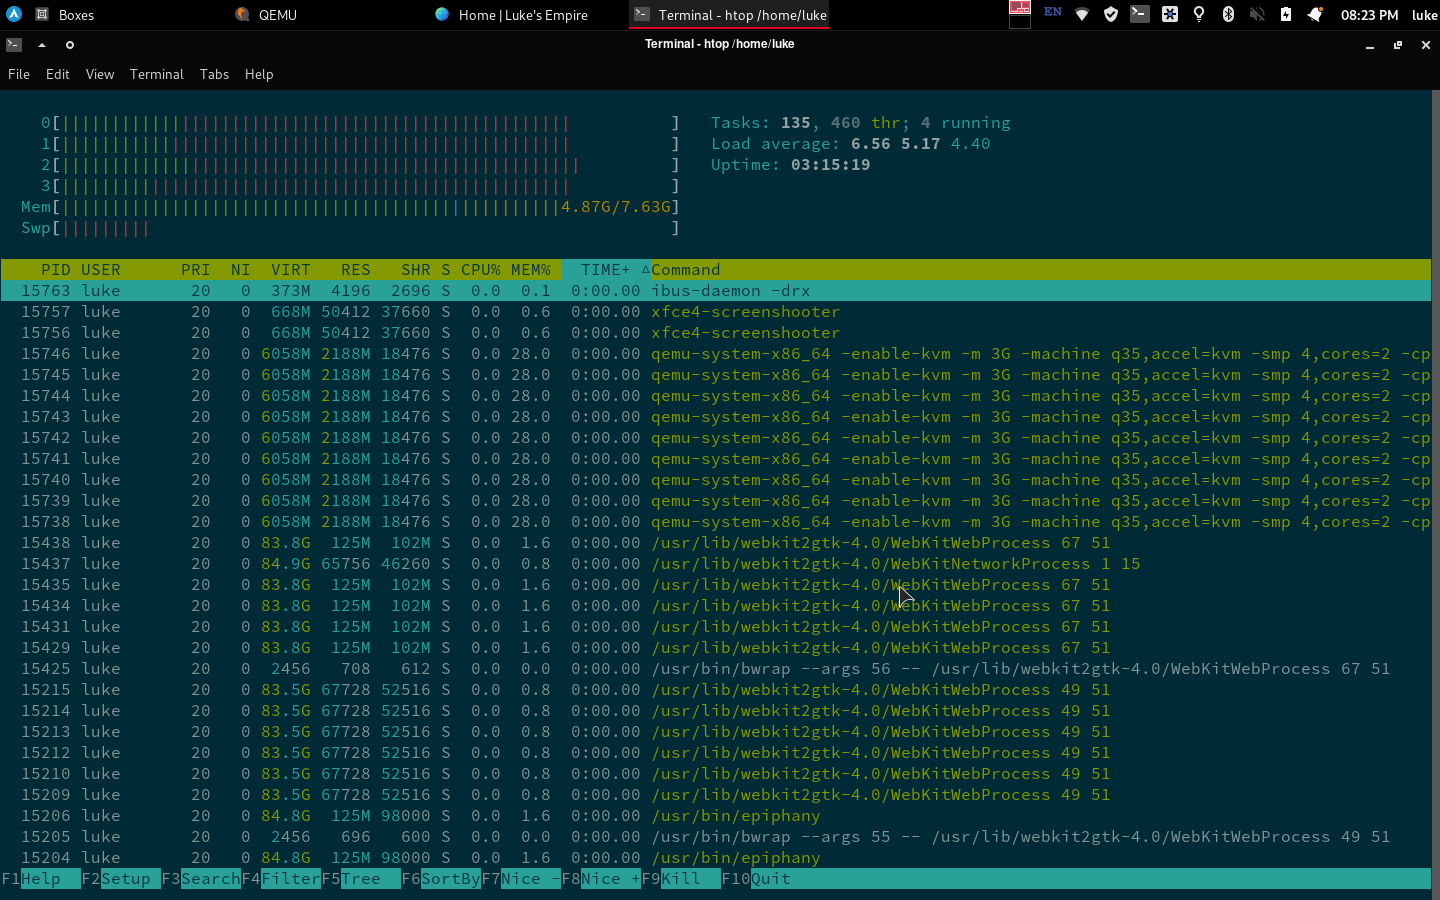 htop on the physical machine